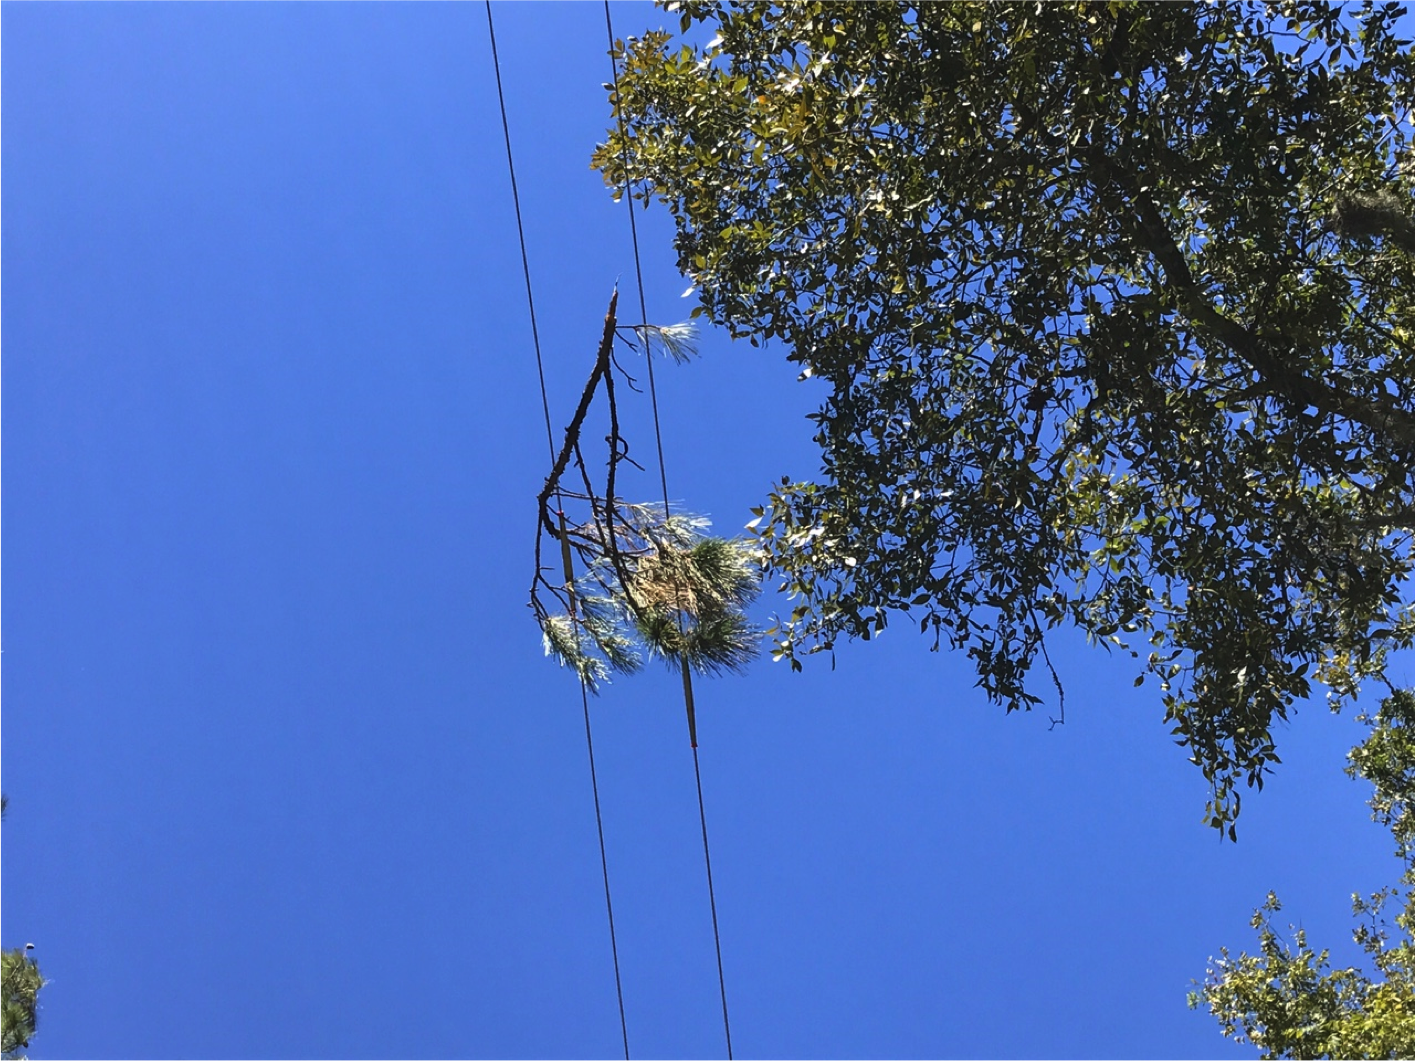 Early stages of a vegetation fault on an electrical line